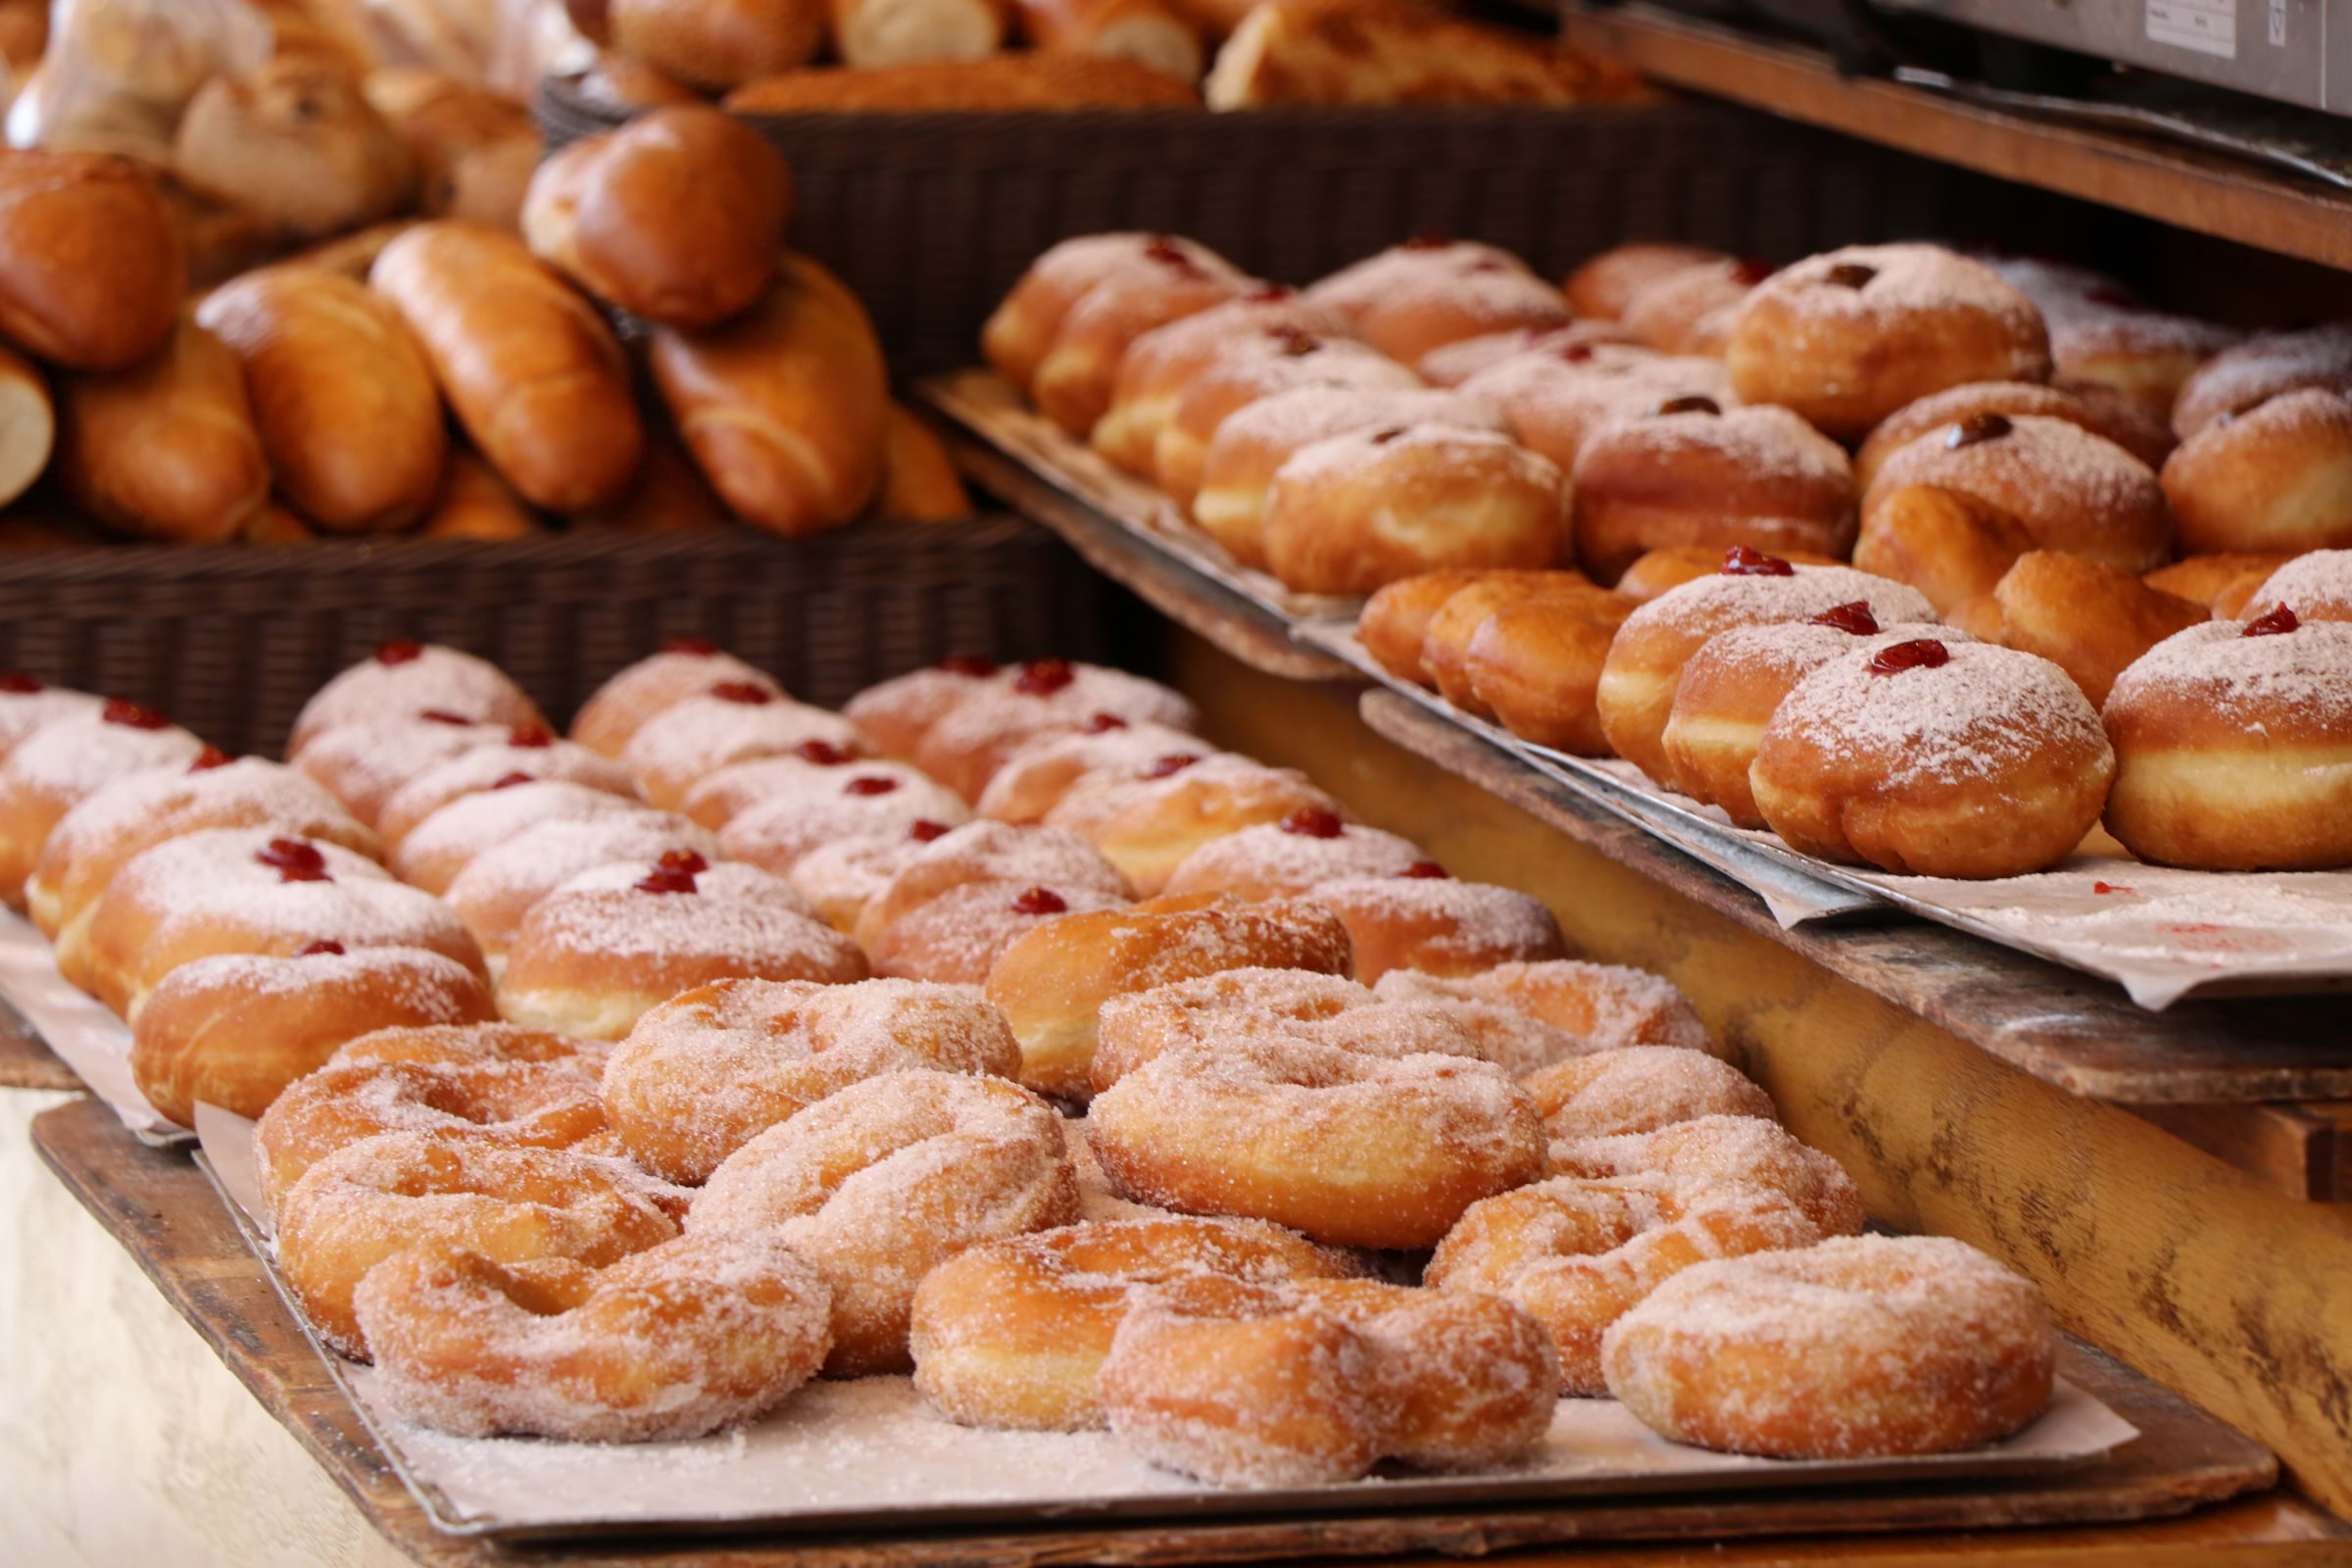 Guide to the best doughnuts in London